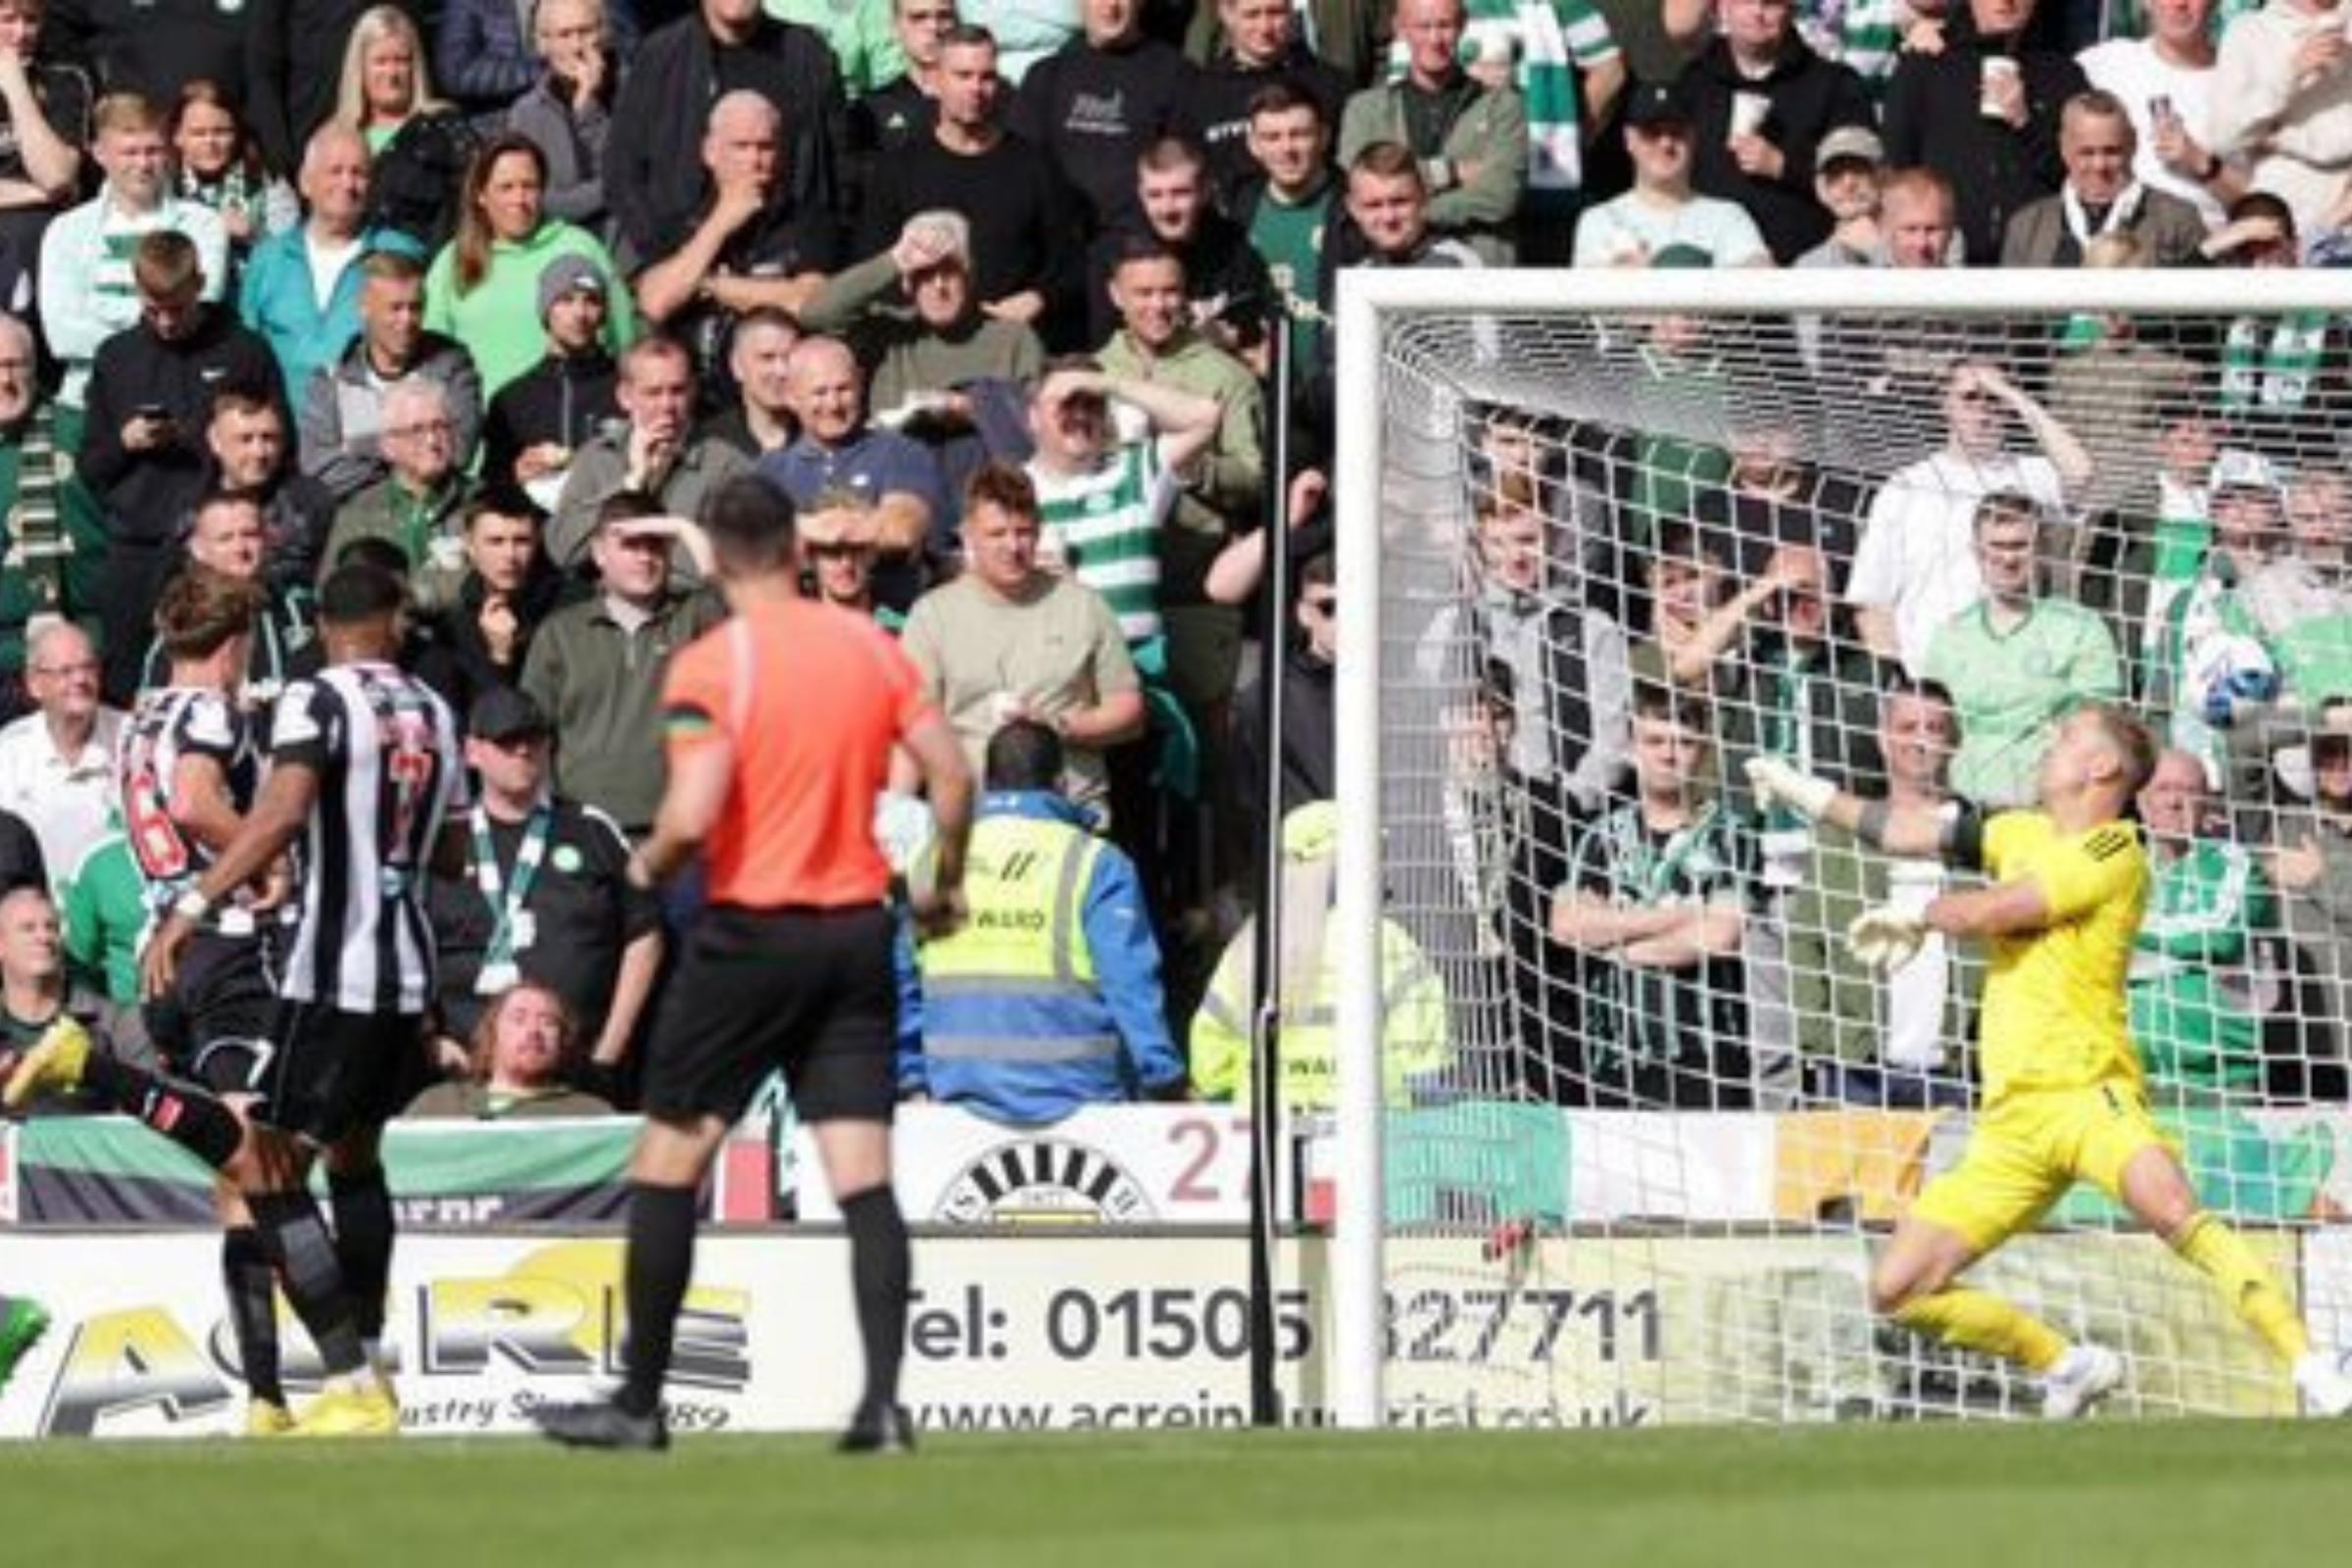 3 Celtic burning issues as Ange Postecoglou's side lose to St Mirren in Paisley